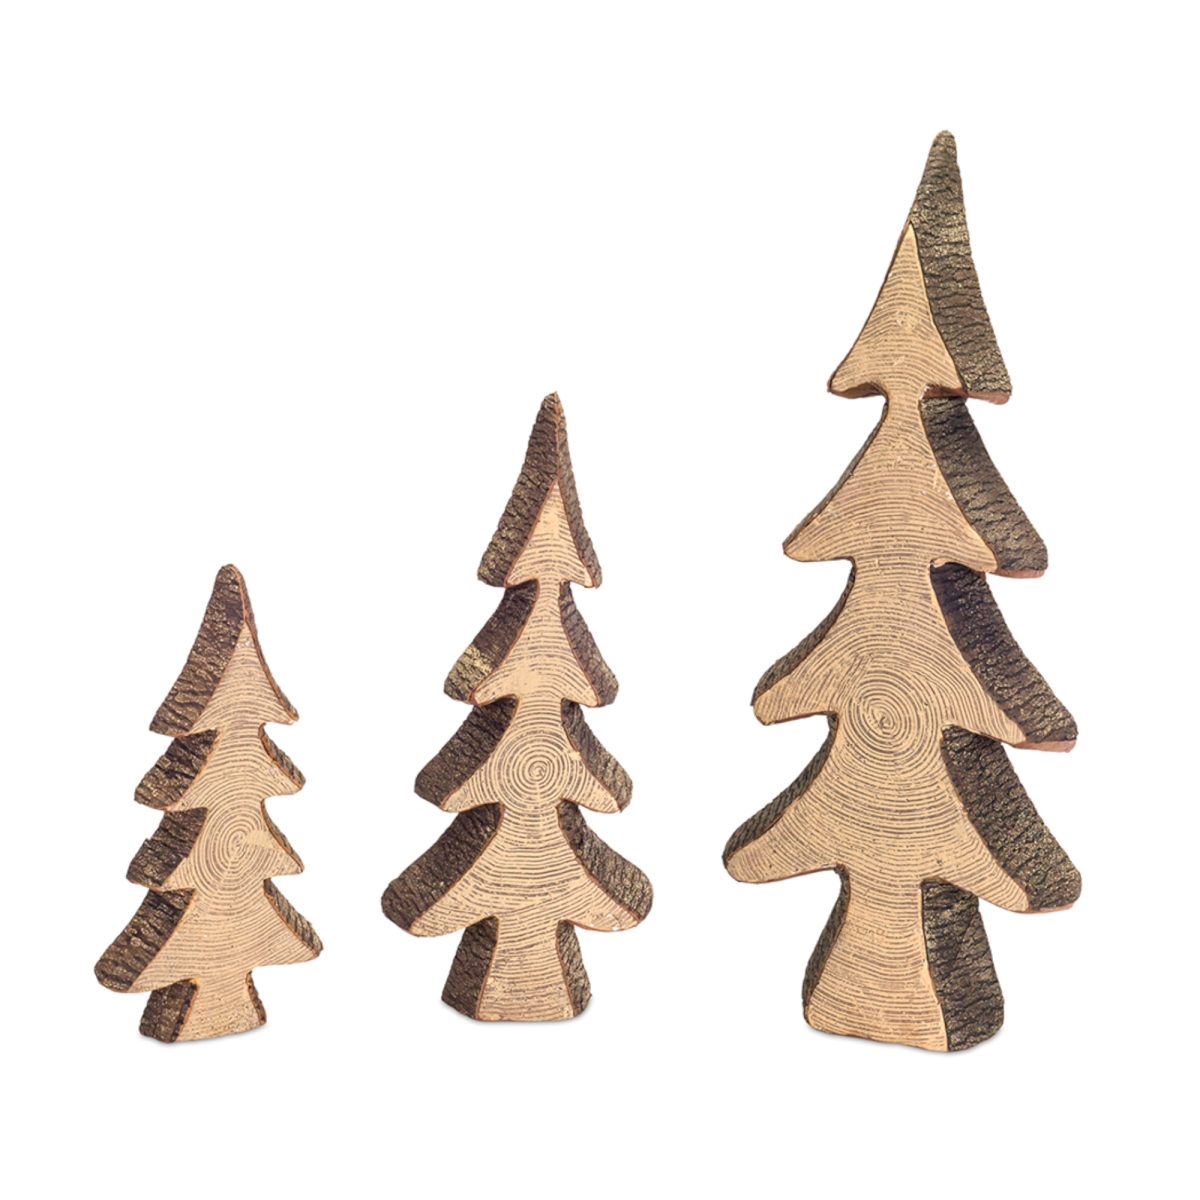 72461ds 15.5 X 20 X 29 In. Foam Tree Novelty Christmas Toy, Brown - Set Of 3